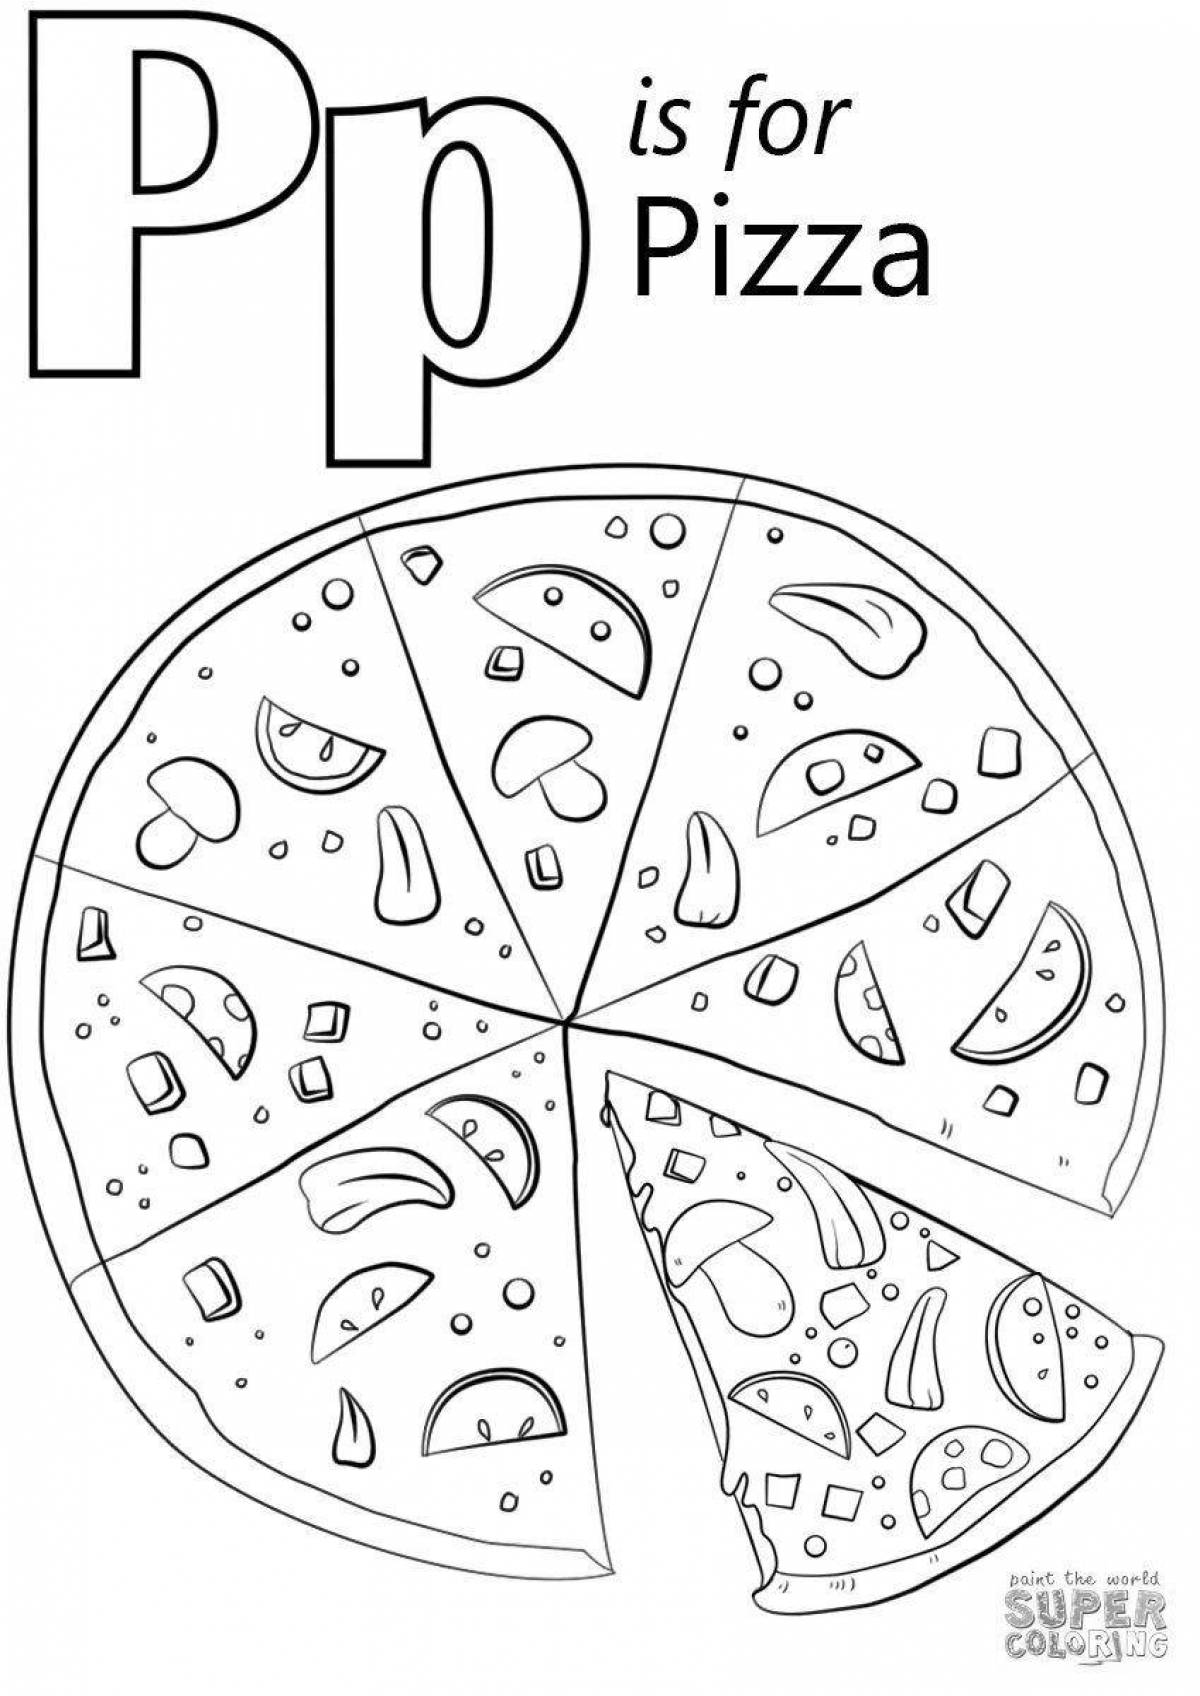 Adorable pizza coloring page